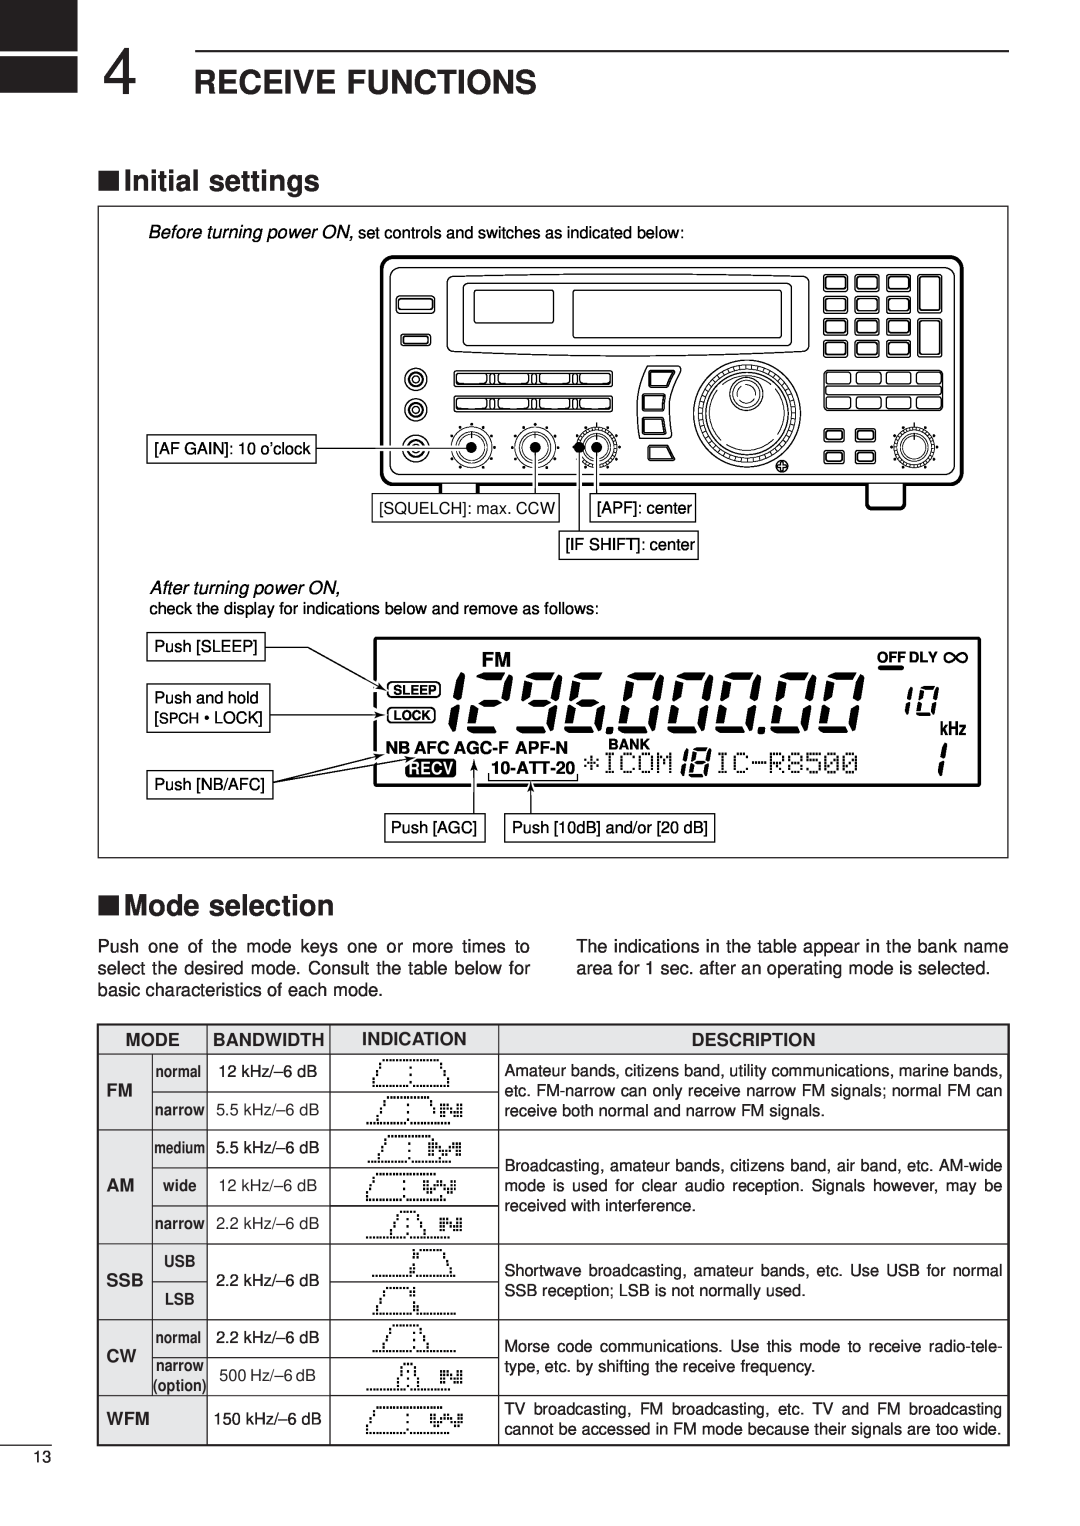 Icom IC-R8500 Receive Functions, Initial settings, Mode selection, After turning power ON, Nb Afc Agc-F Apf-N, ATT-20 